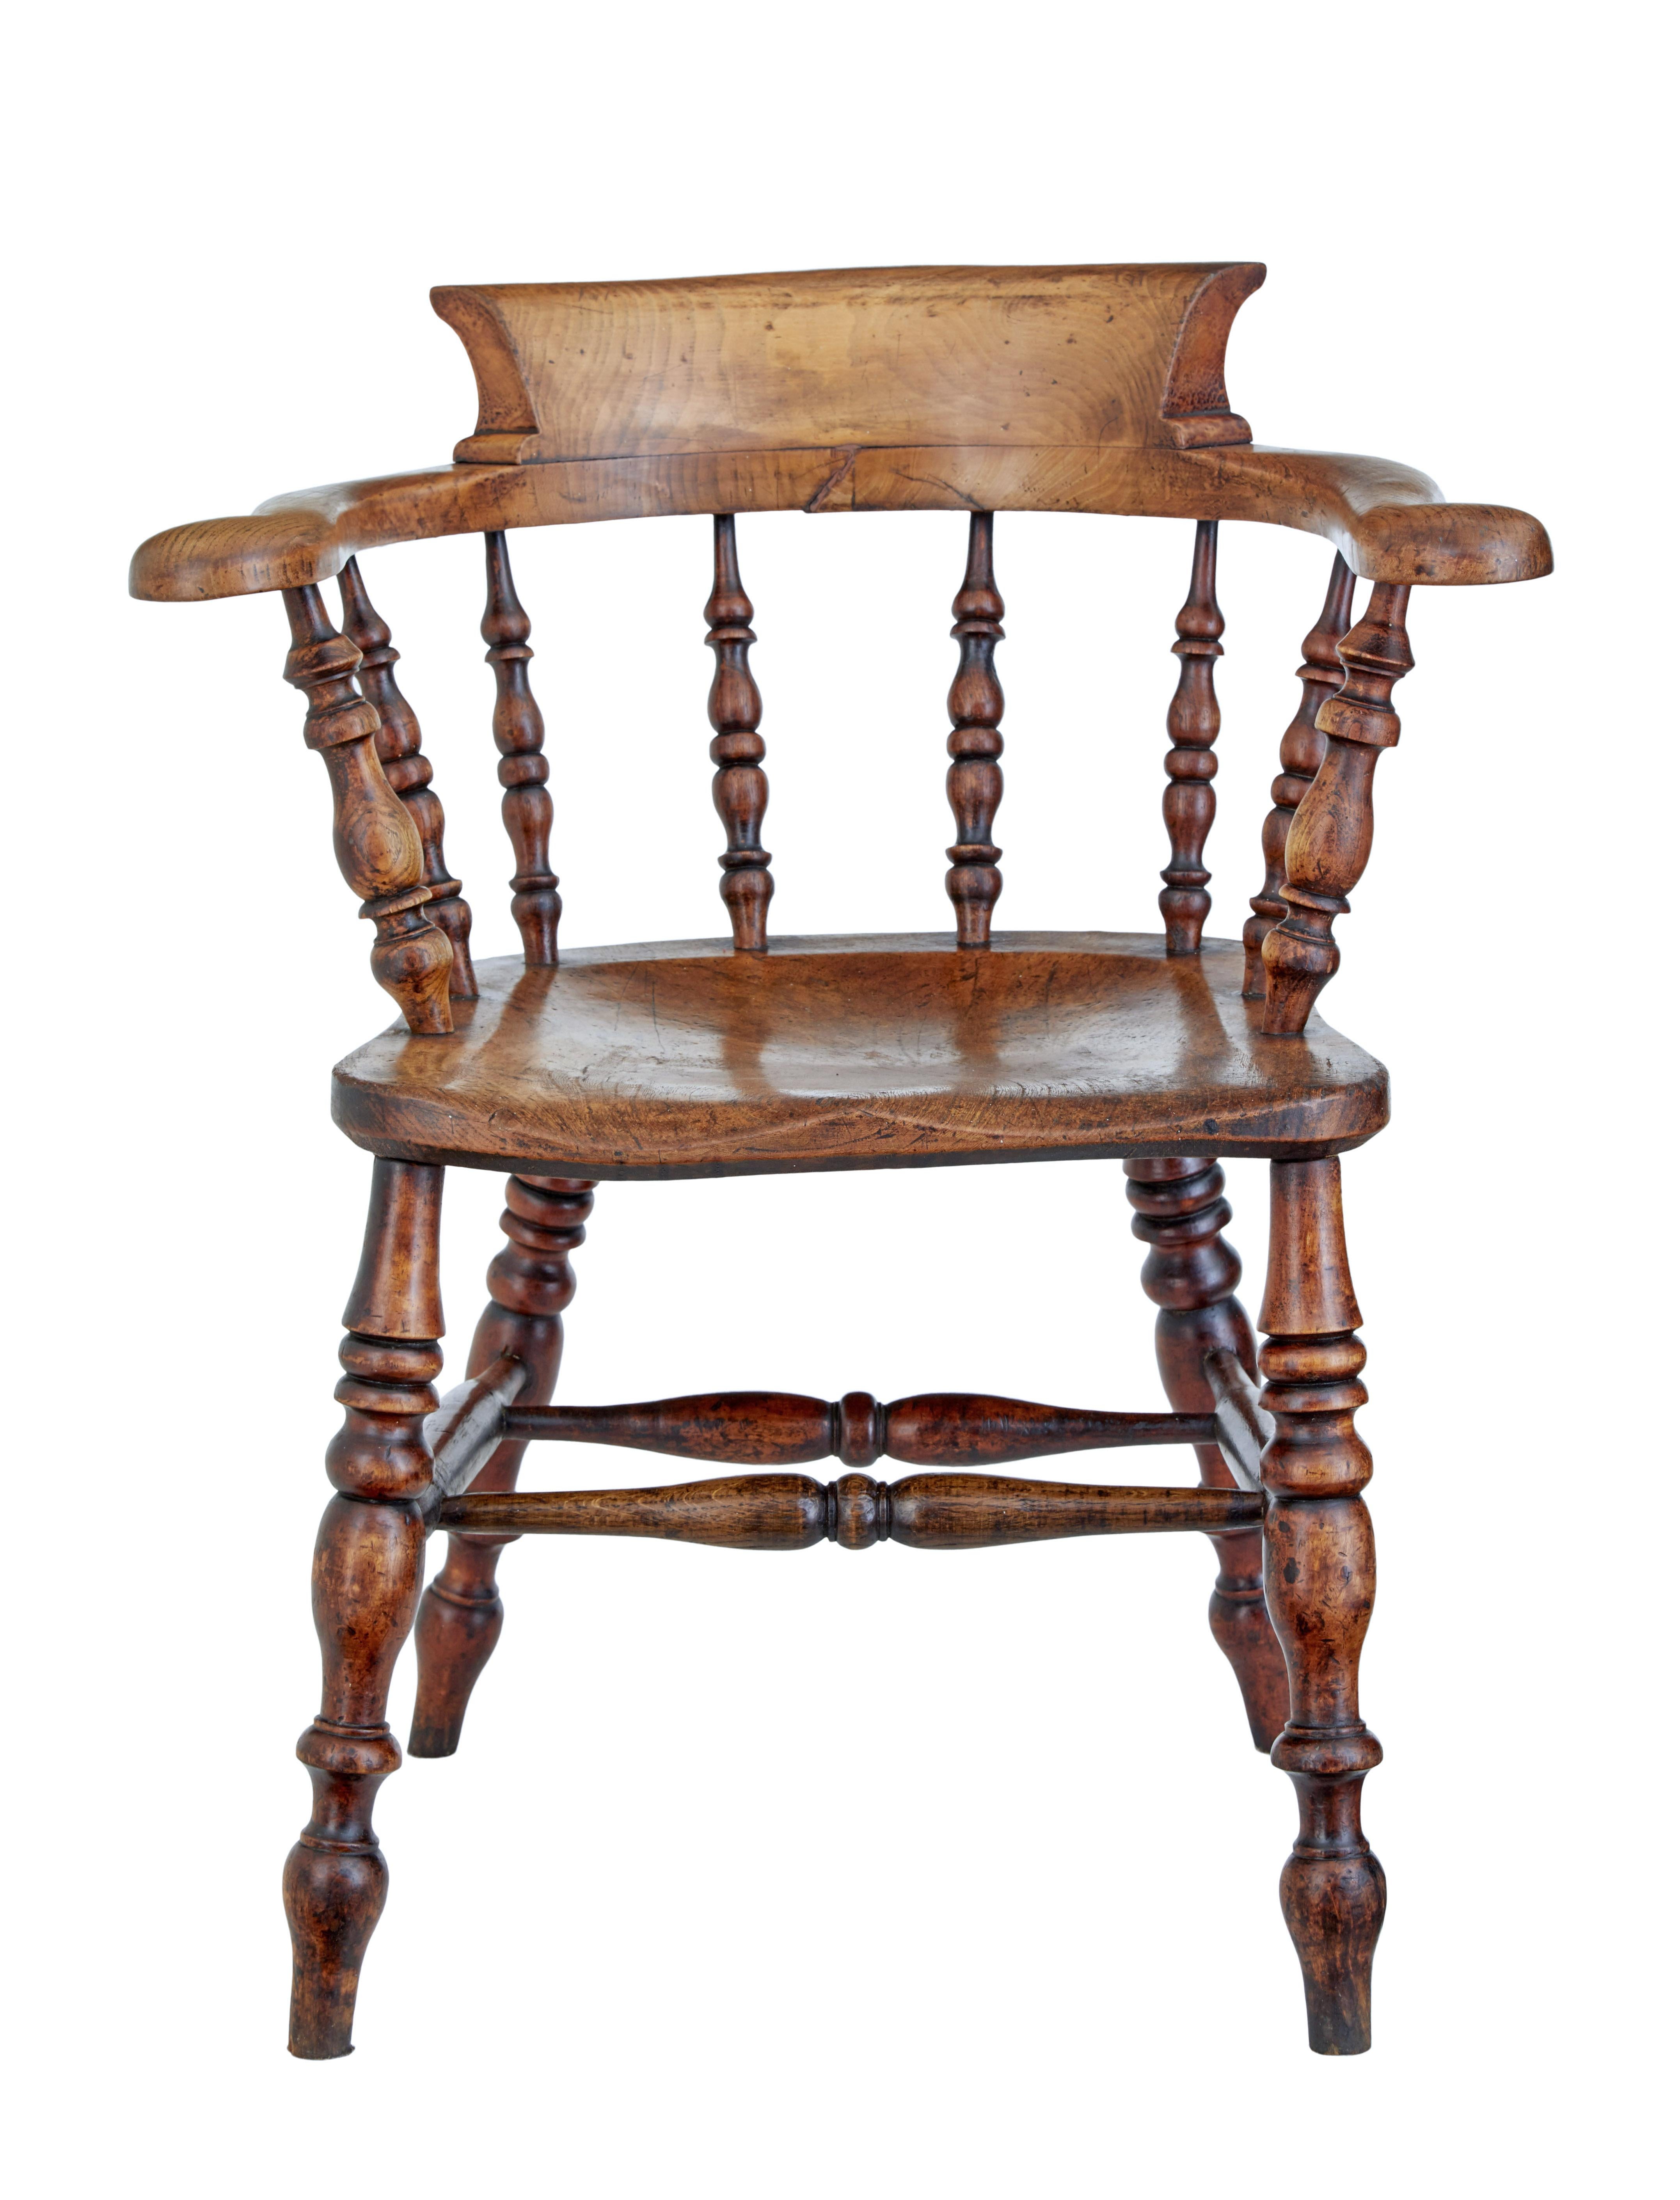 Mid-19th century elm captains armchair, circa 1860.

Good quality character armchair made from solid elm. Shaped back and arm linked with turned spindles to the seat. Turned legs united by stretcher.

Obvious surface marks and natural movement